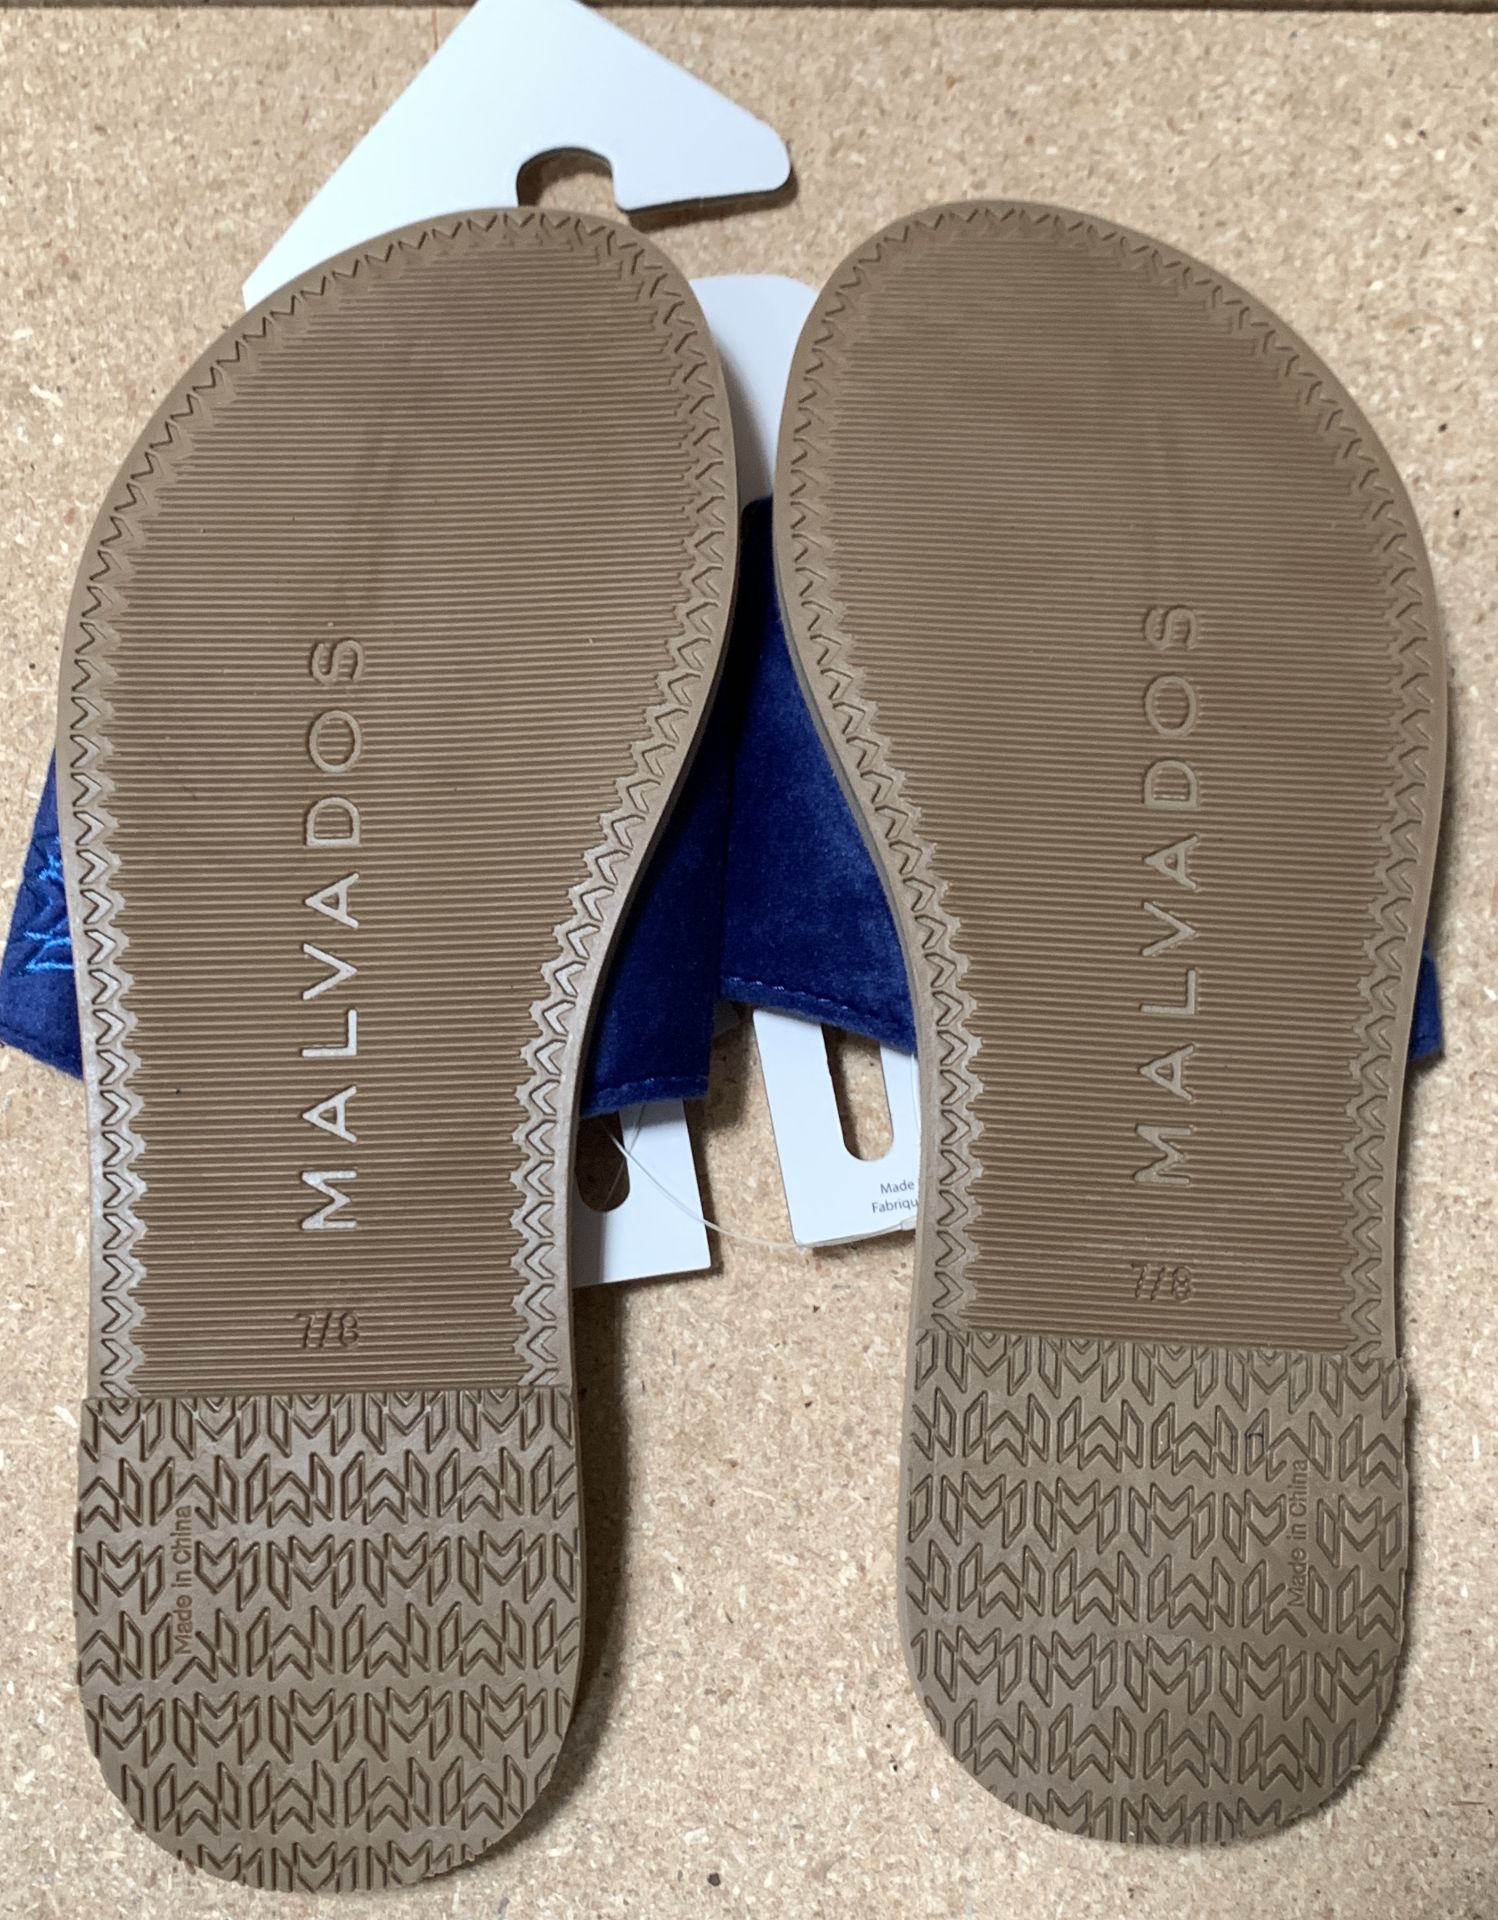 8 Pairs Malvados Flip Flop Sandals, New with Tags, Various Sizes, Icon Taylor Plush (Retail $368) - Image 4 of 5